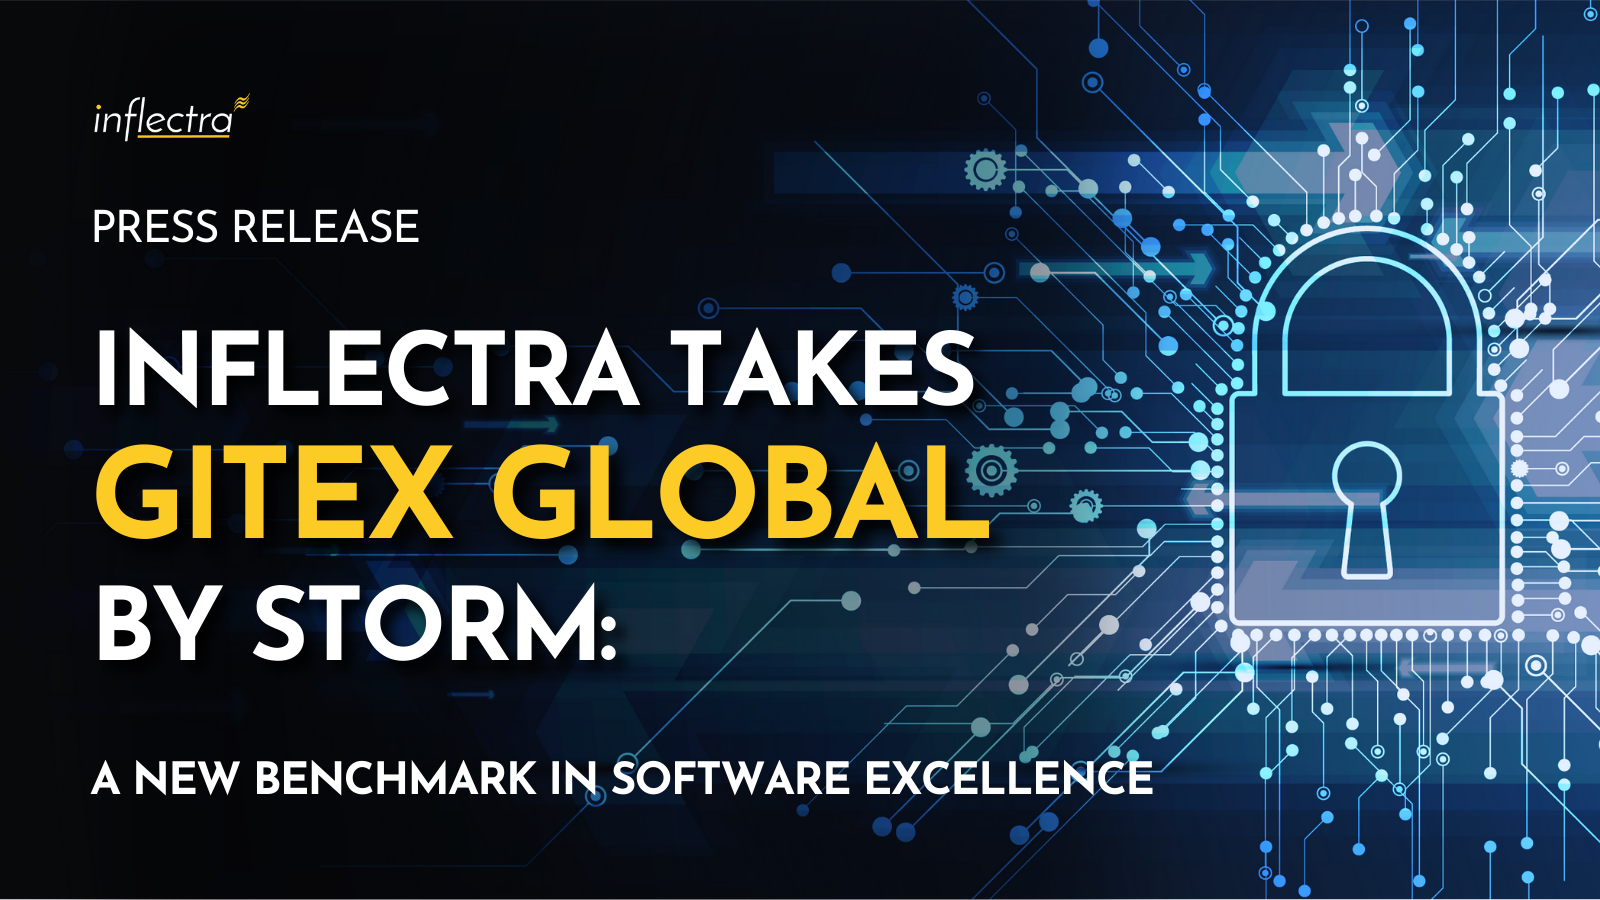 press-release-inflectra-takes-gitex-global-by-storm-a-new-benchmark-in-software-excellence-image